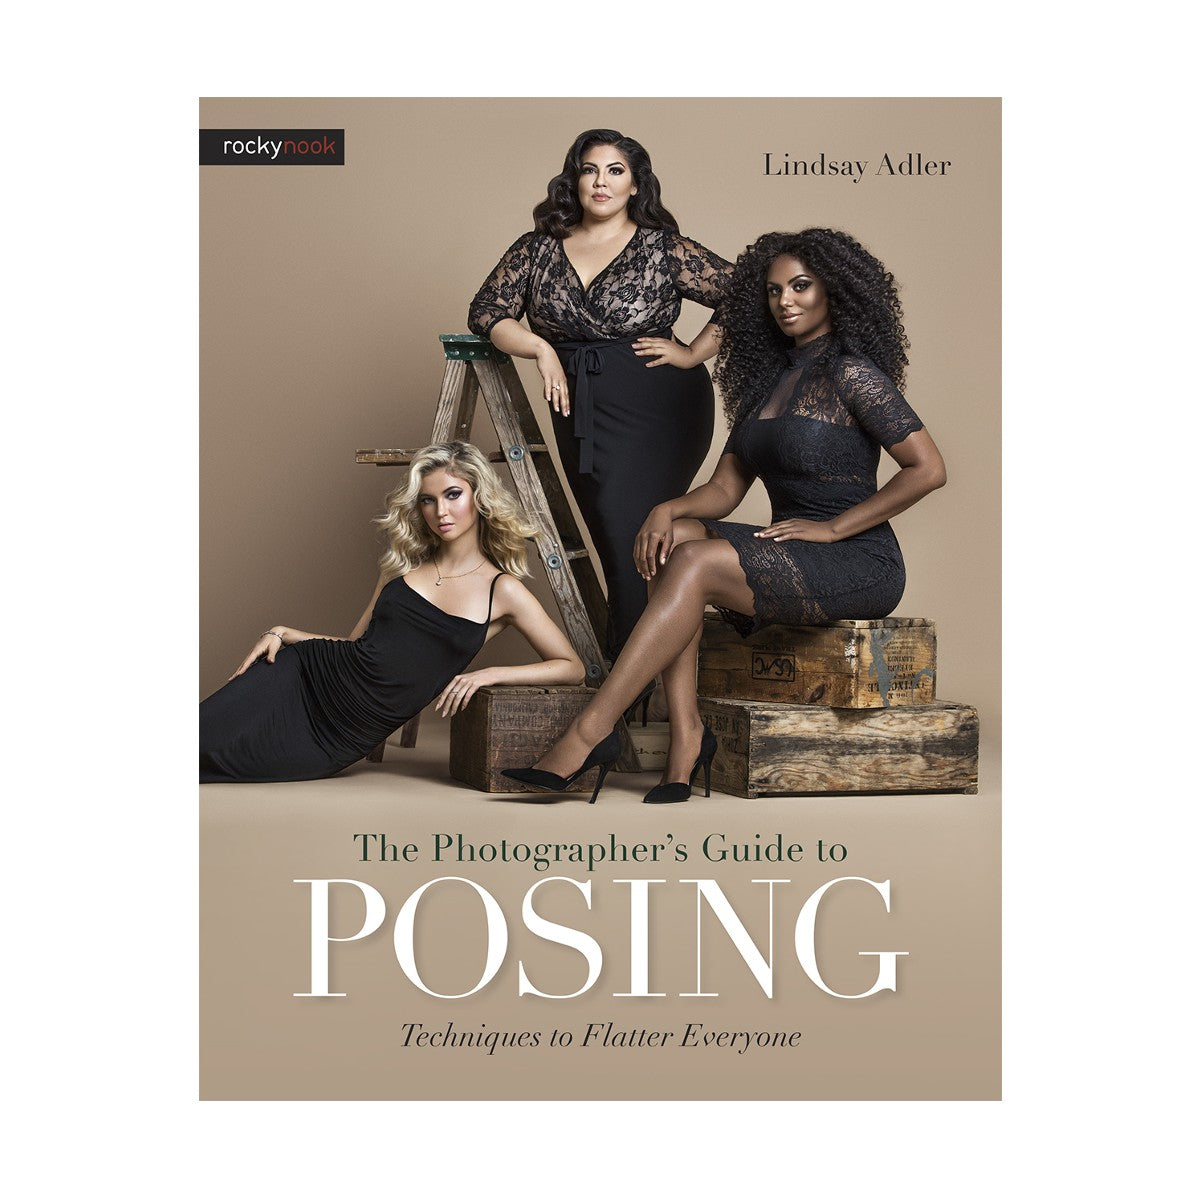 The Photographer's Guide to Posing Book